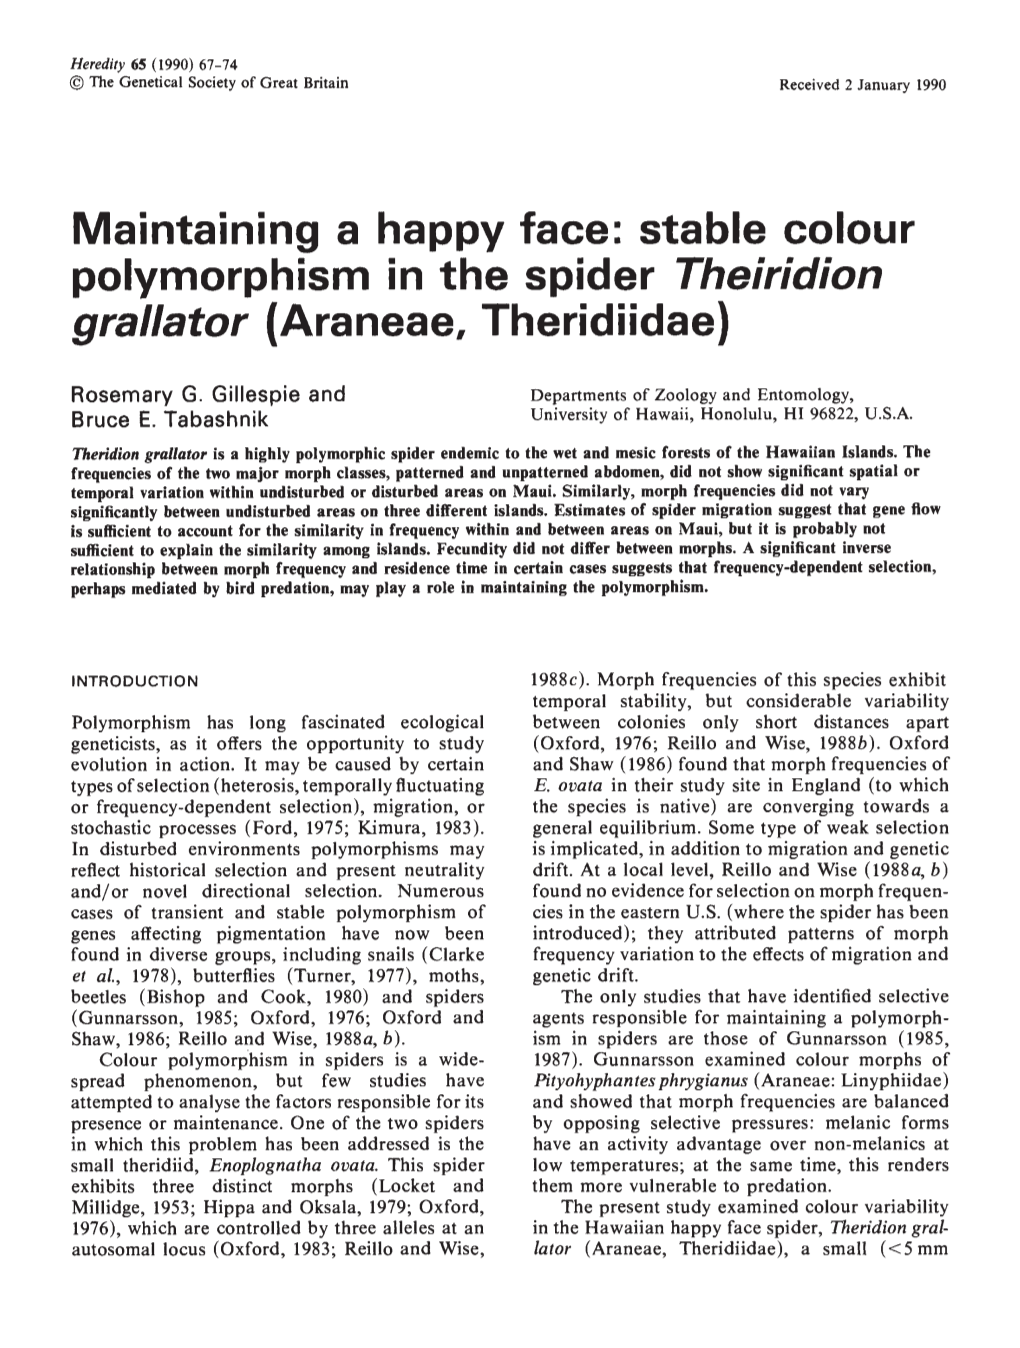 Maintaining a Happy Face: Stable Colour Polymorphism in the Spider Theiridion Grallator (Araneae, Theridiidae)